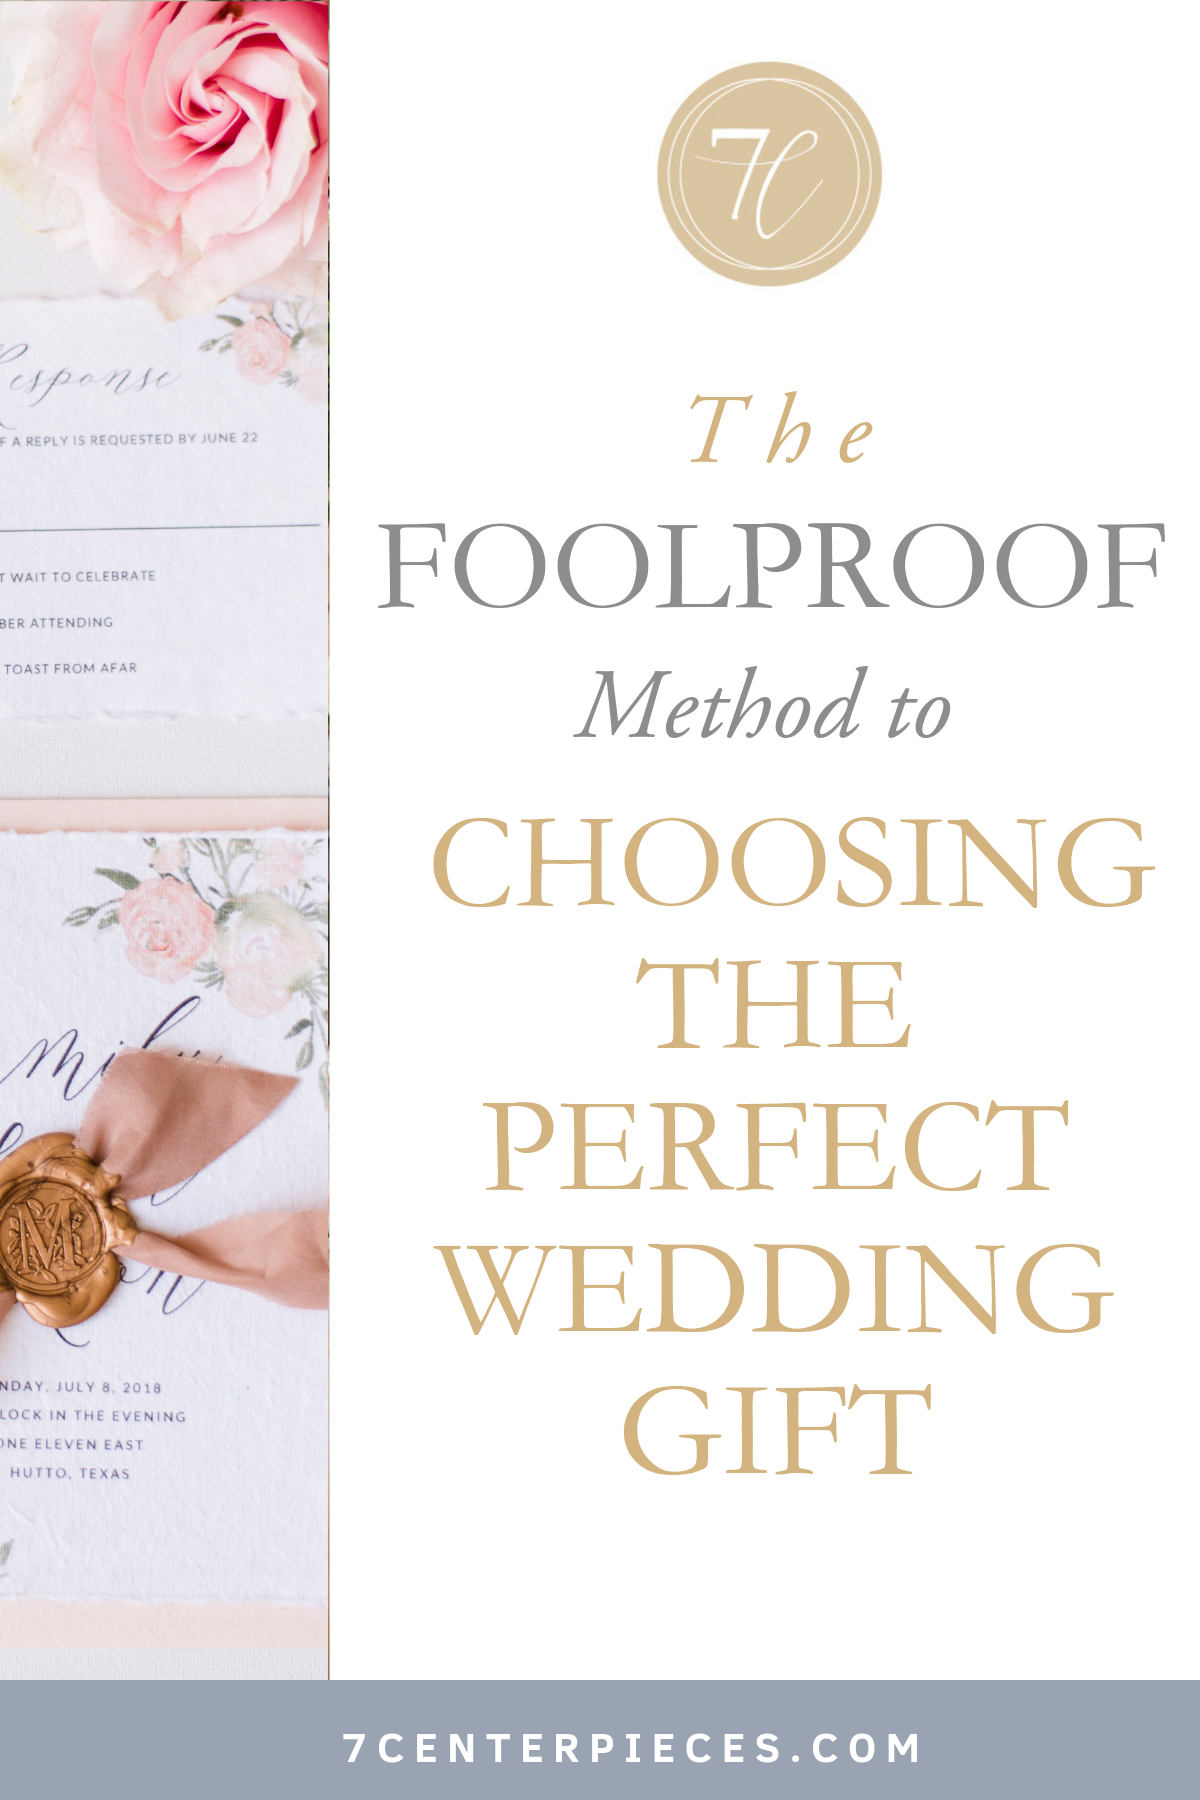 The Foolproof Method to Choosing the Perfect Wedding Gift